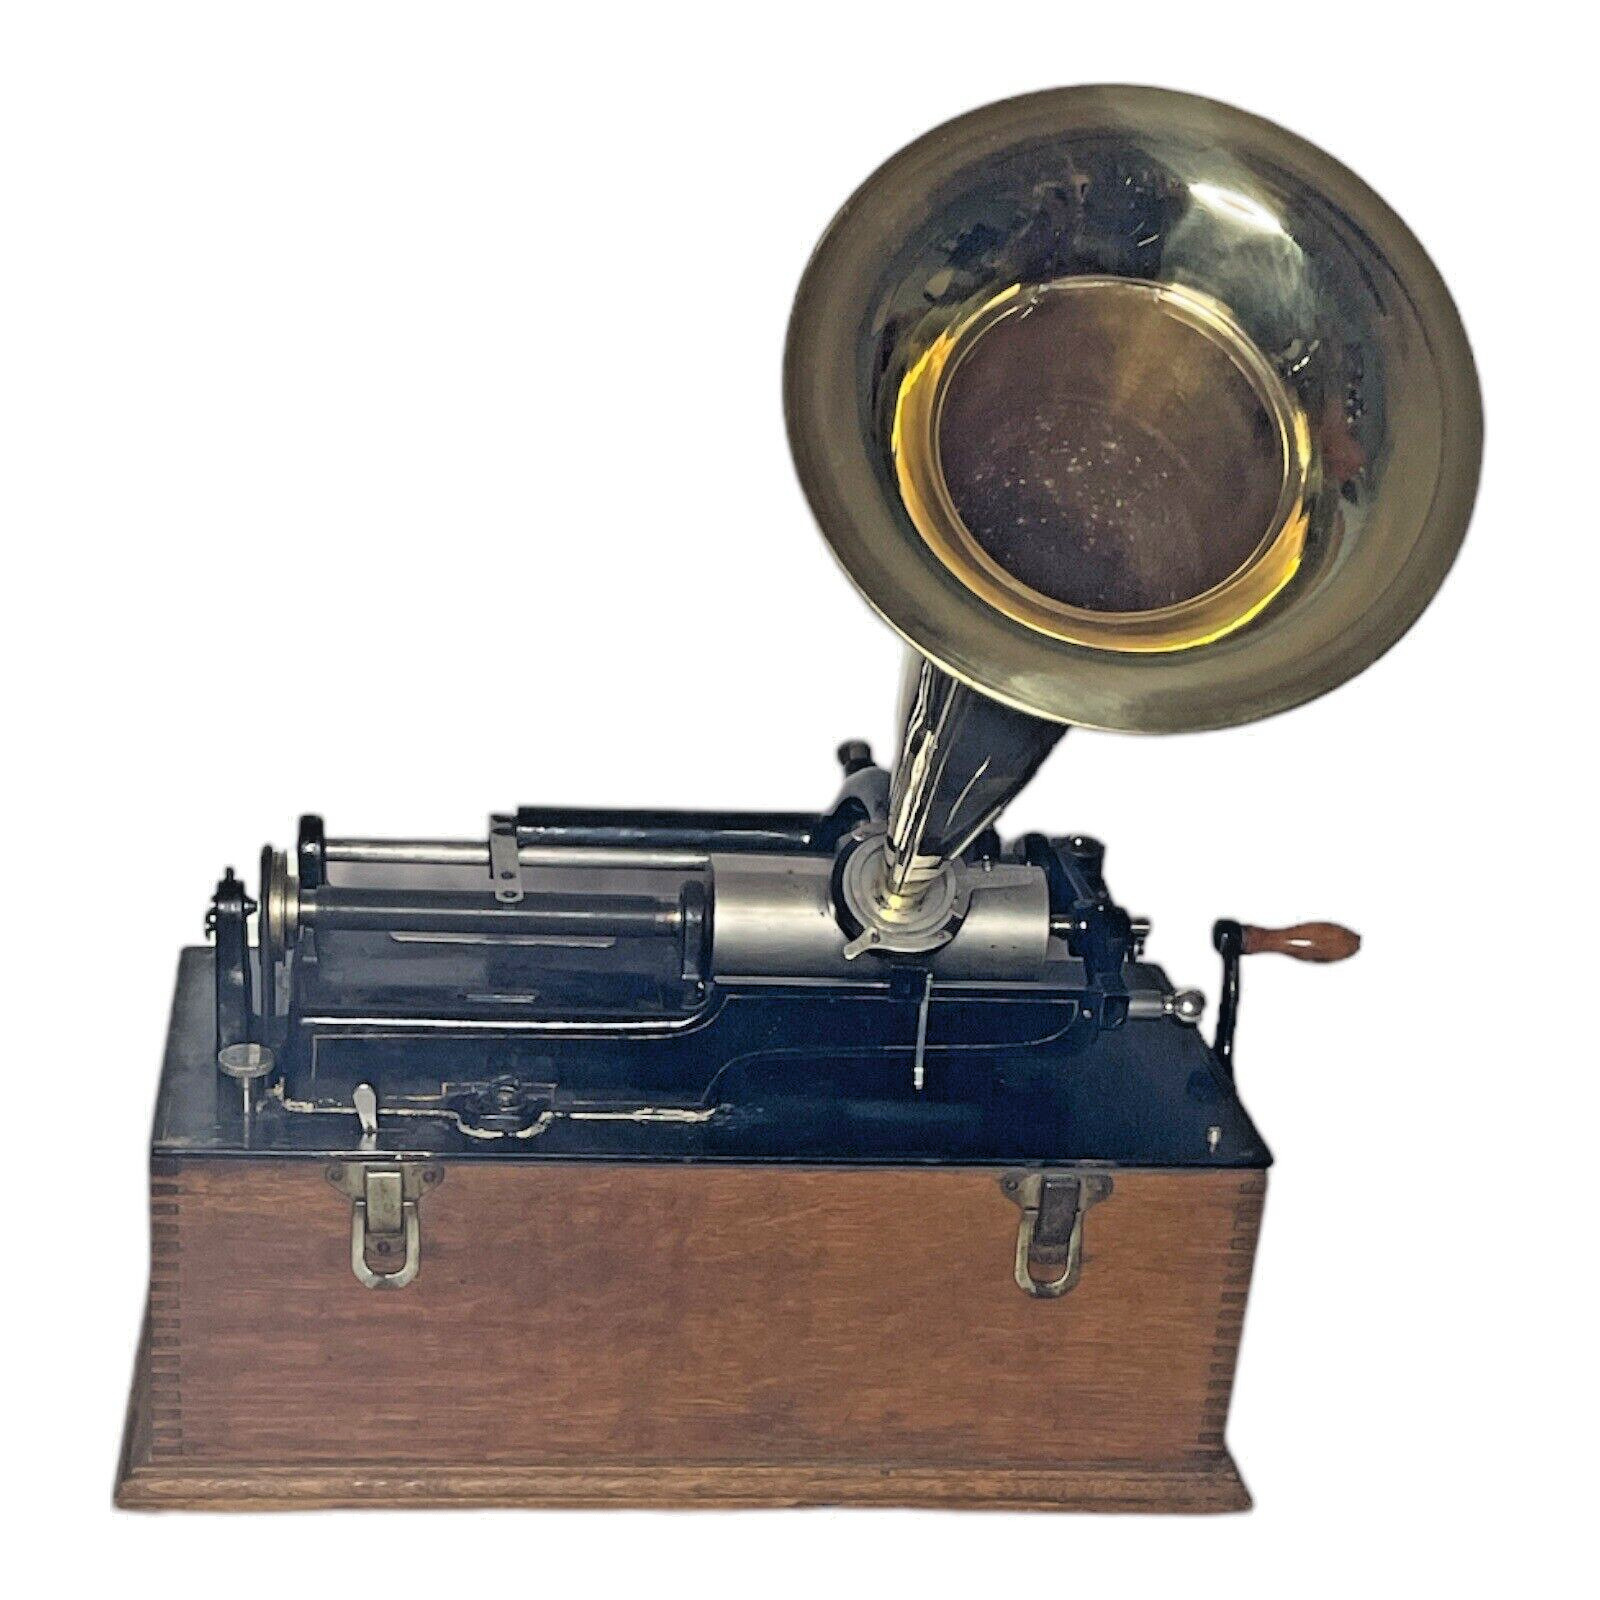 Antique Working 1898 EDISON Home Phonograph with Horn (probably not original)